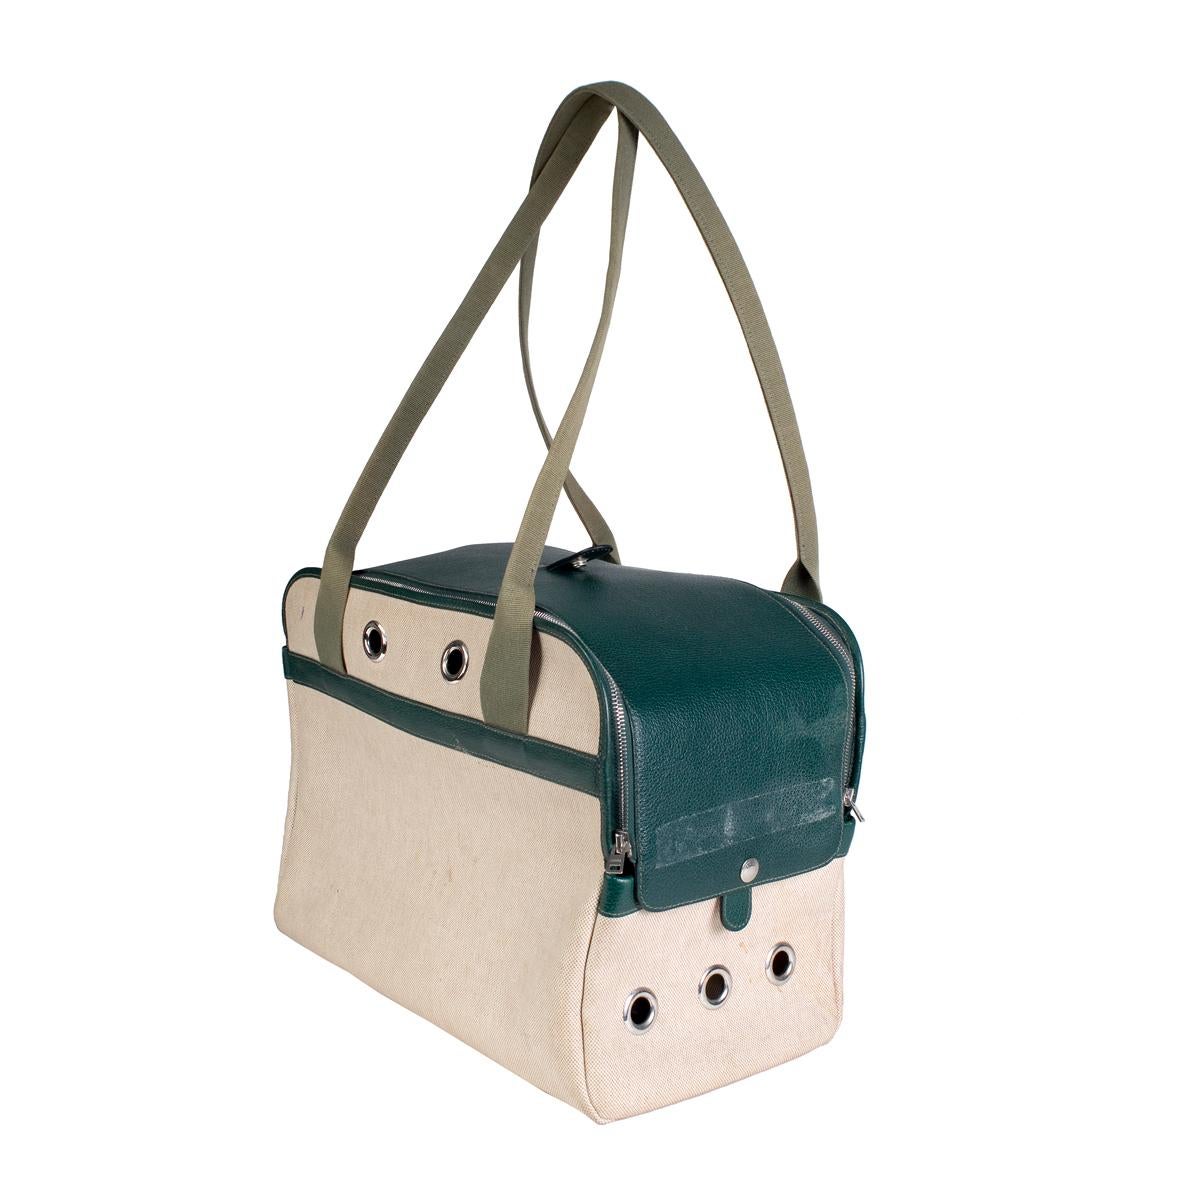 Dog carrier by Hermes
Double zipper closure on top that snaps to stay open
Large grommet holes for breathability
Green canvas web straps
Dimensions:  16